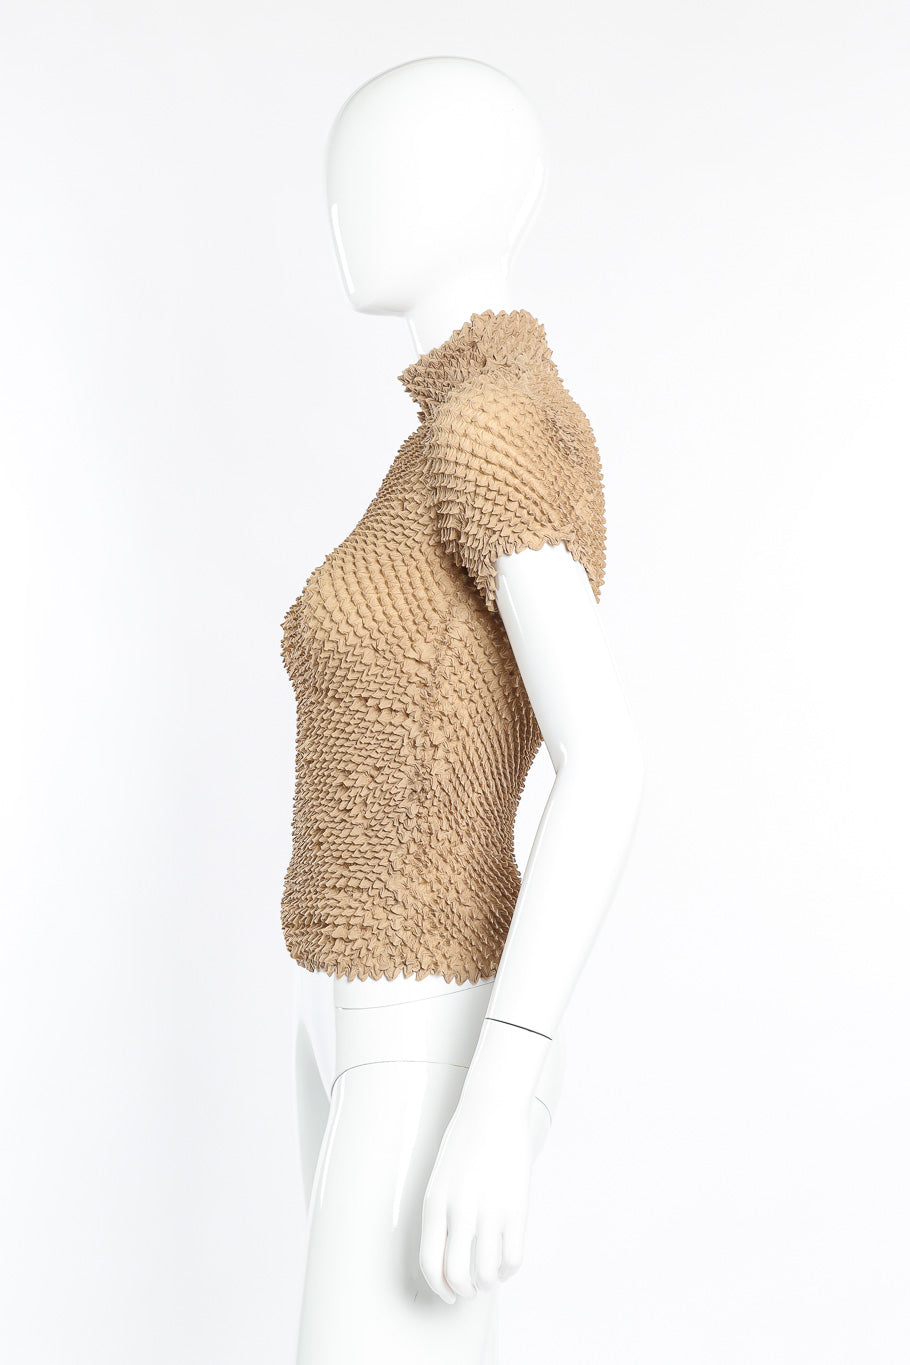 Issey Miyake Spiked Pleat Top side view on mannequin at @Recessla